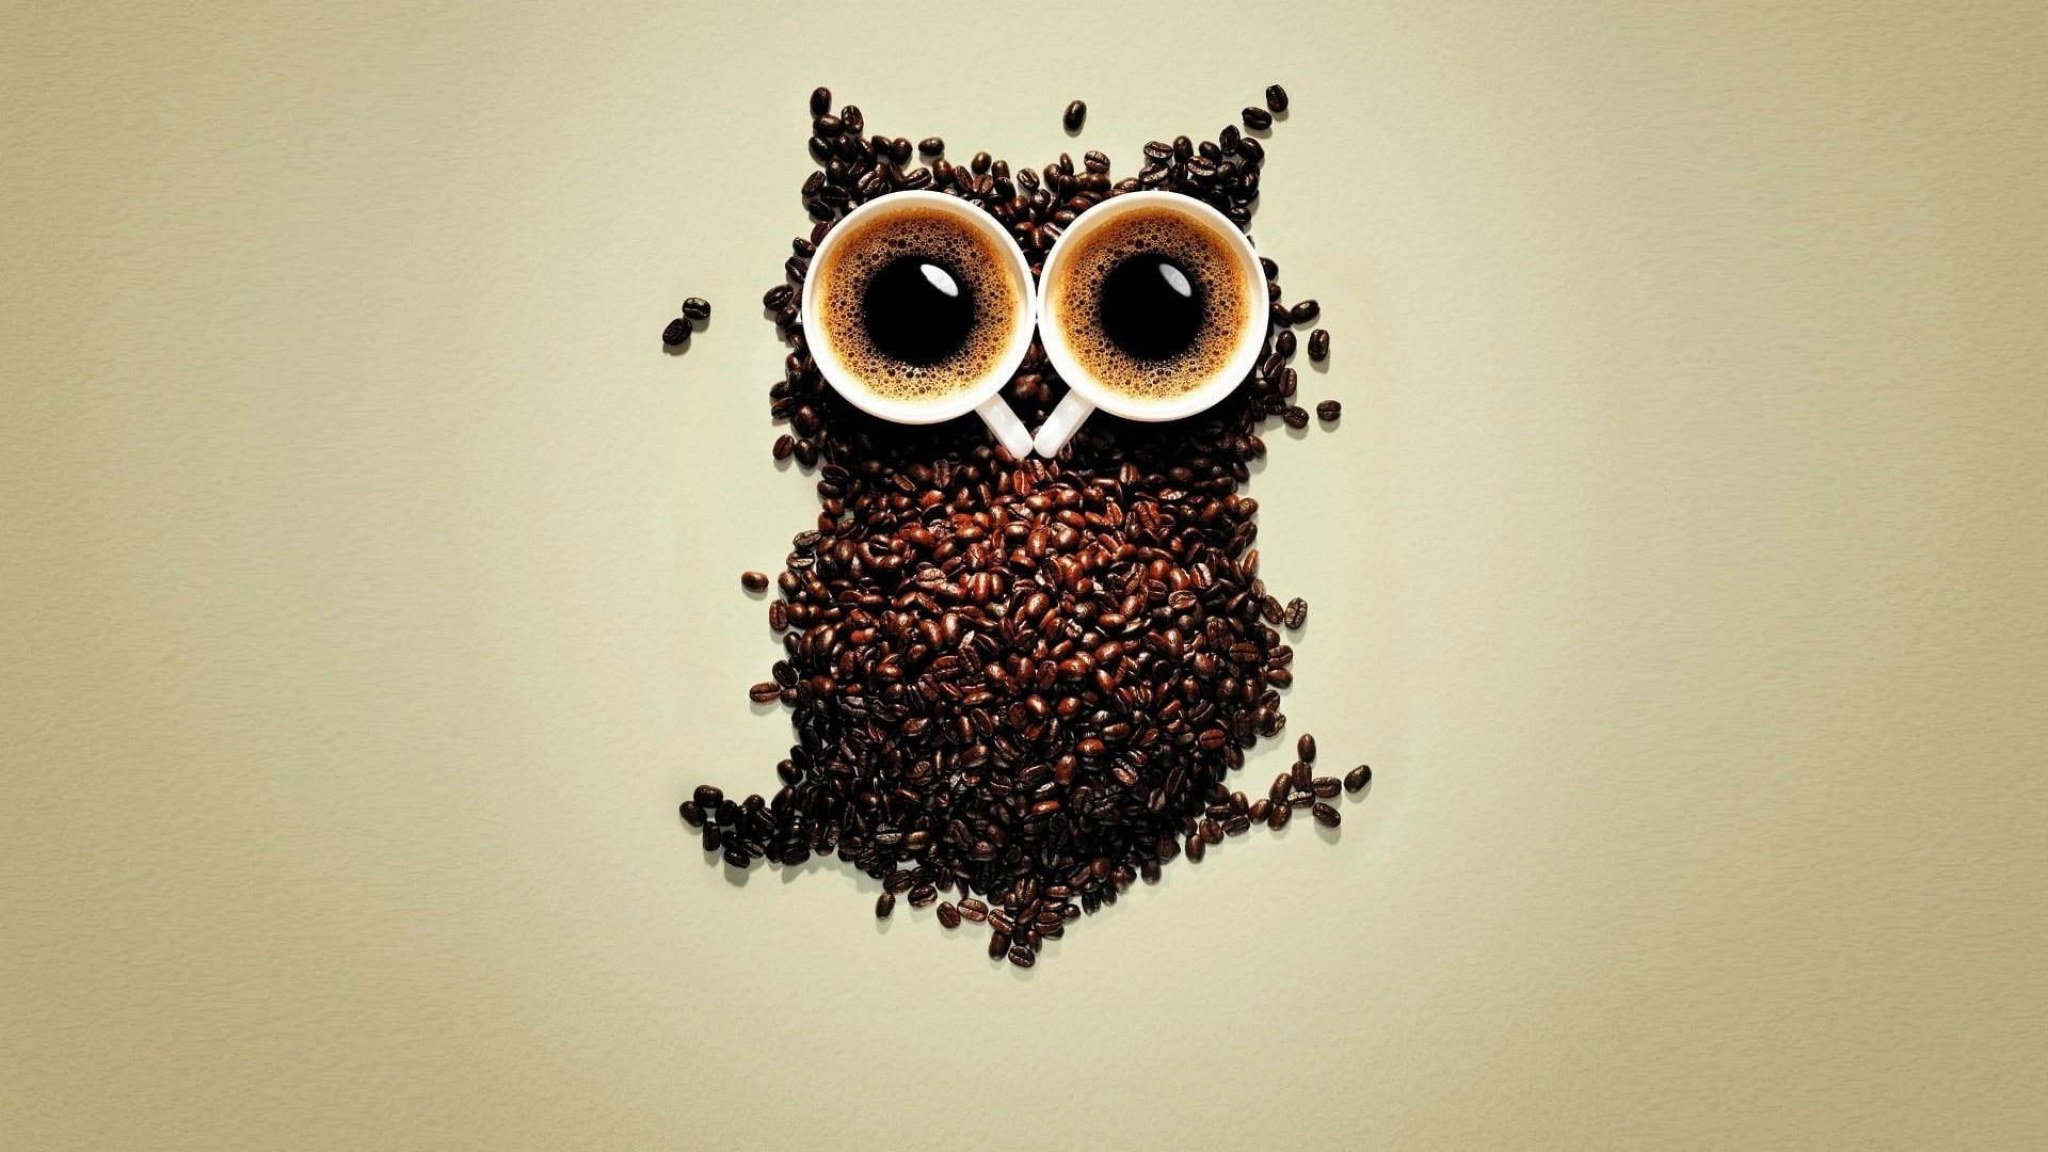 Owl Wallpaper, Beans, Coffee Beans, Funny, Cup, Cups • Wallpaper For You